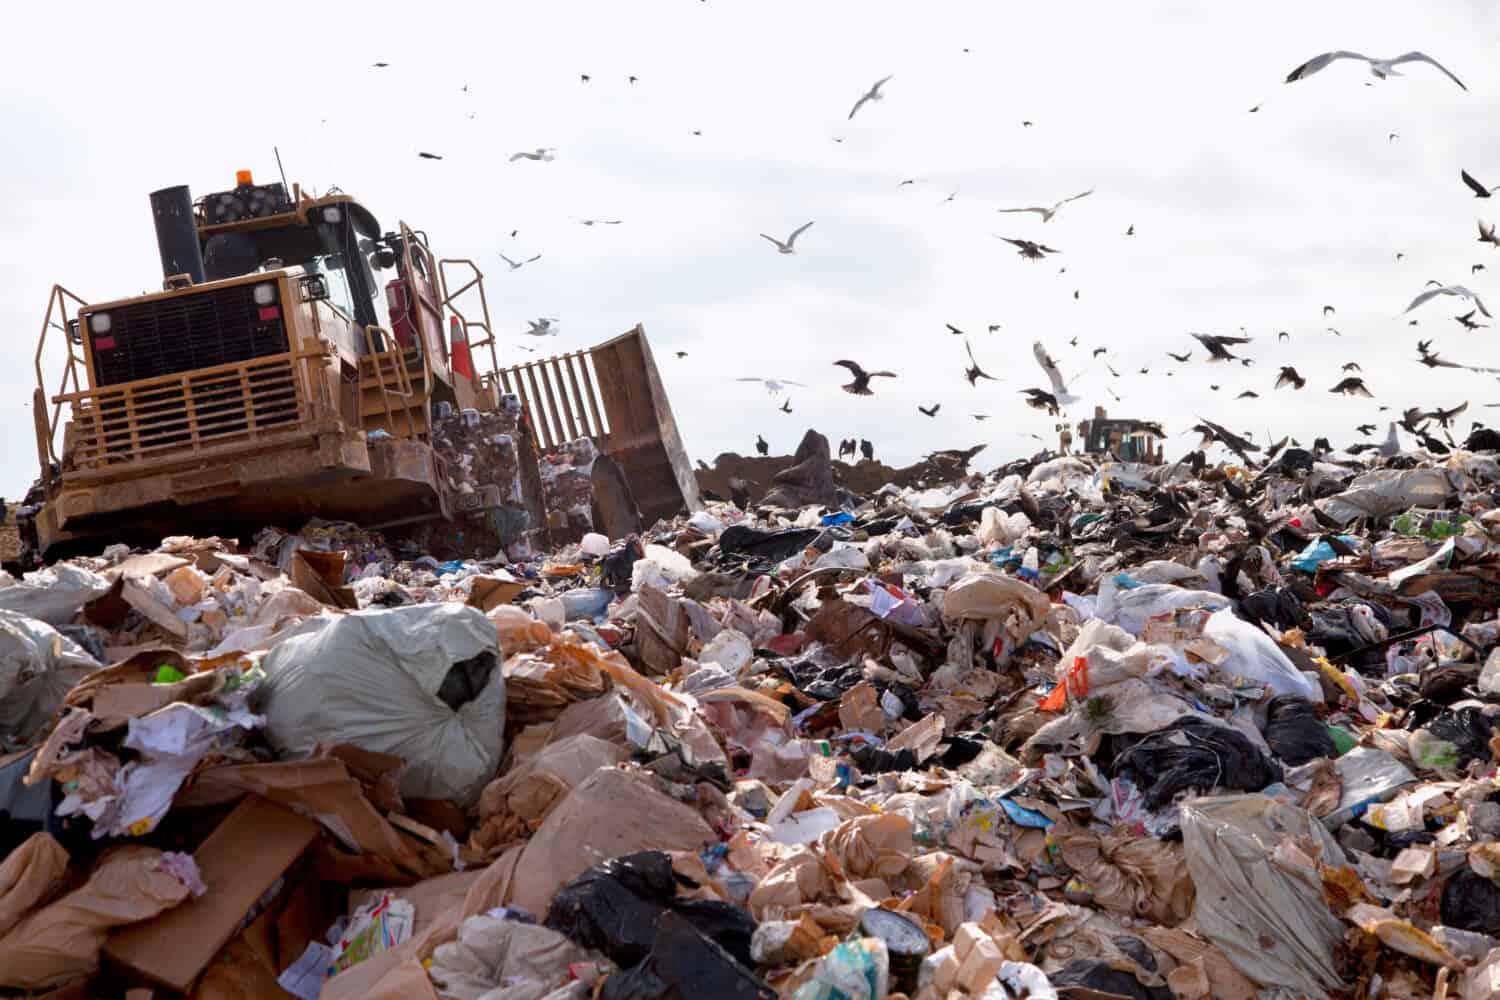 Truck working in landfill with birds looking for food